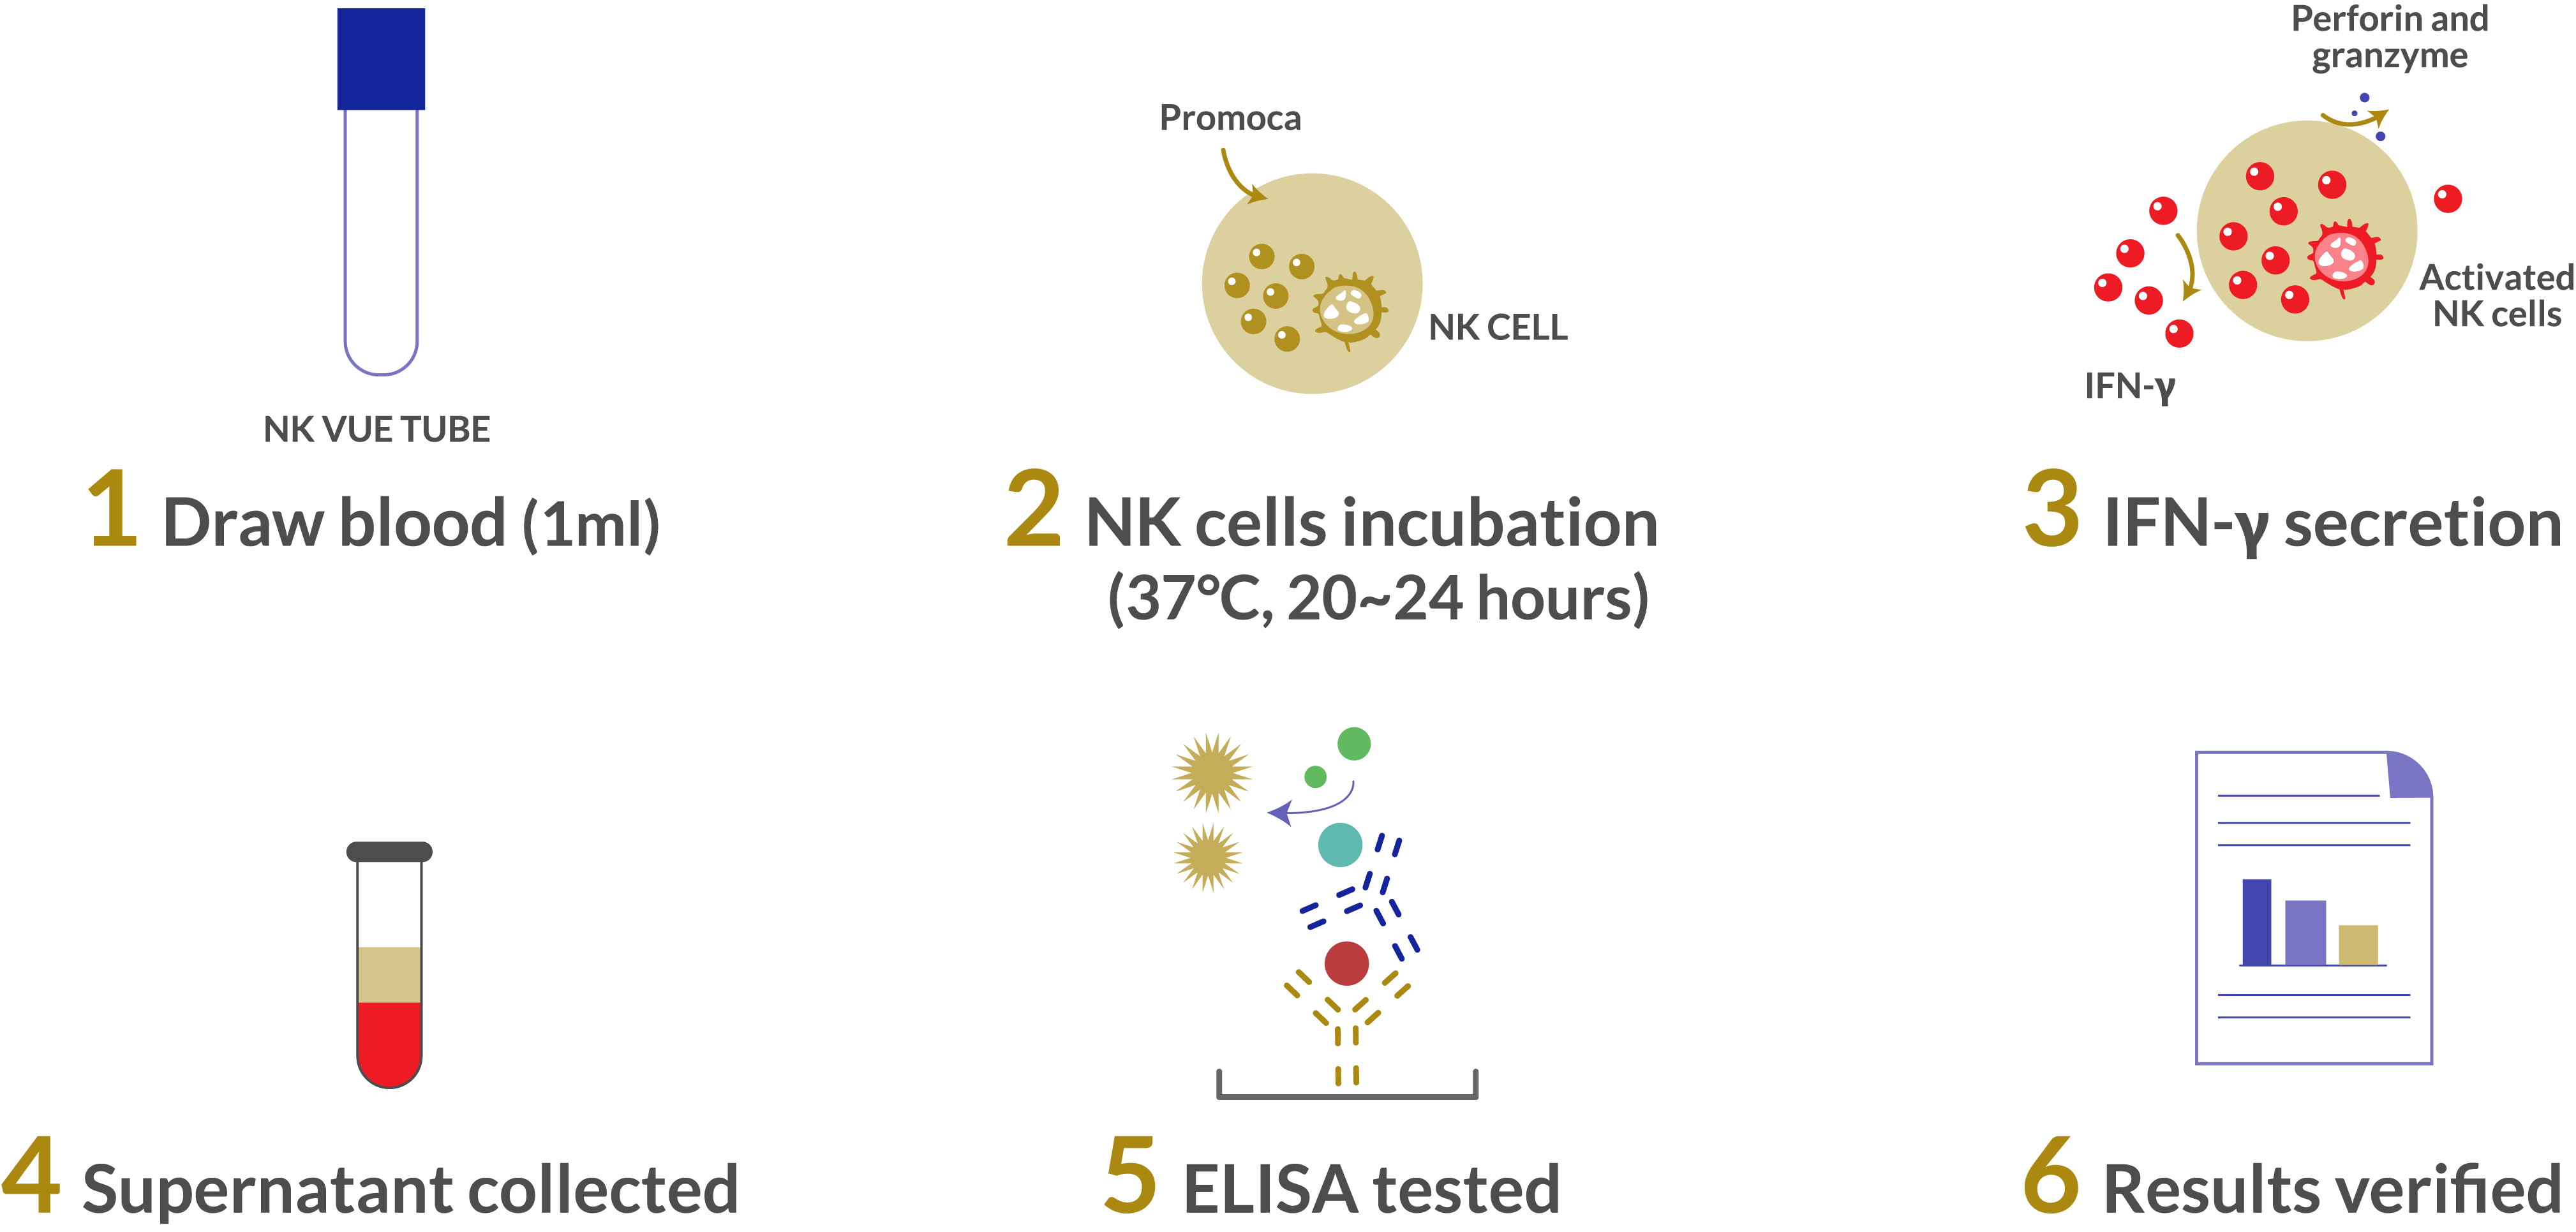 Illustration demonstrating the measurement of NK cell activity level through a conventional parameter. The measurement assesses the immune level by quantifying the concentration of IFN-ɣ released by activated NK cells in 1 ml of blood sample.